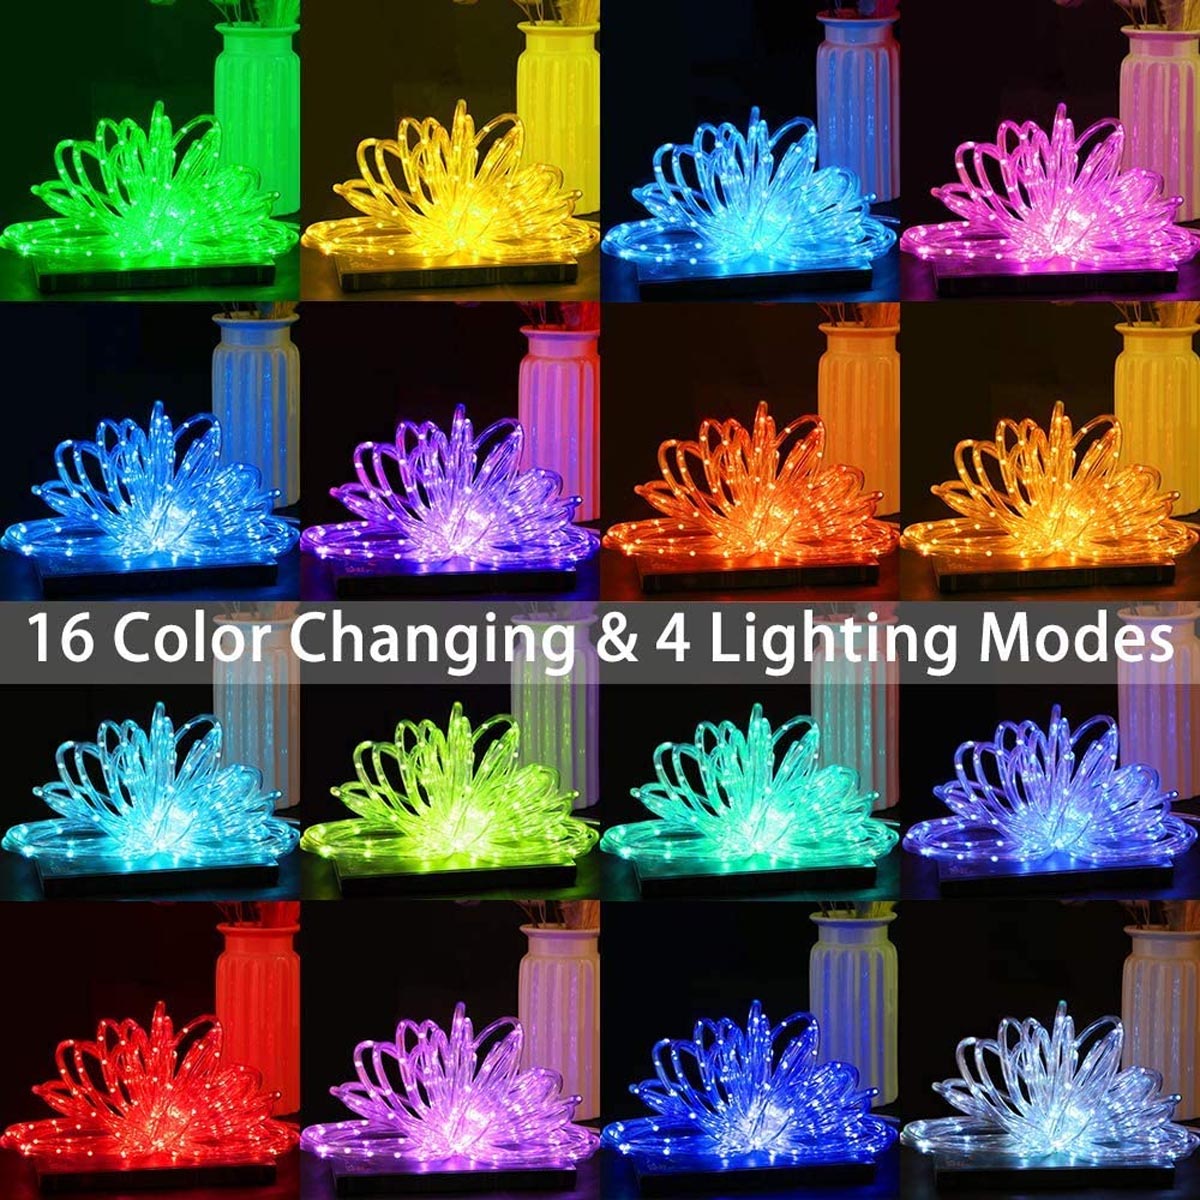 12m-50LED-8-Modes-Solar-String-Lights-Fairy-Strip-Yard-Party-Wedding-Decor-Colorful-Waterproof-1809547-4